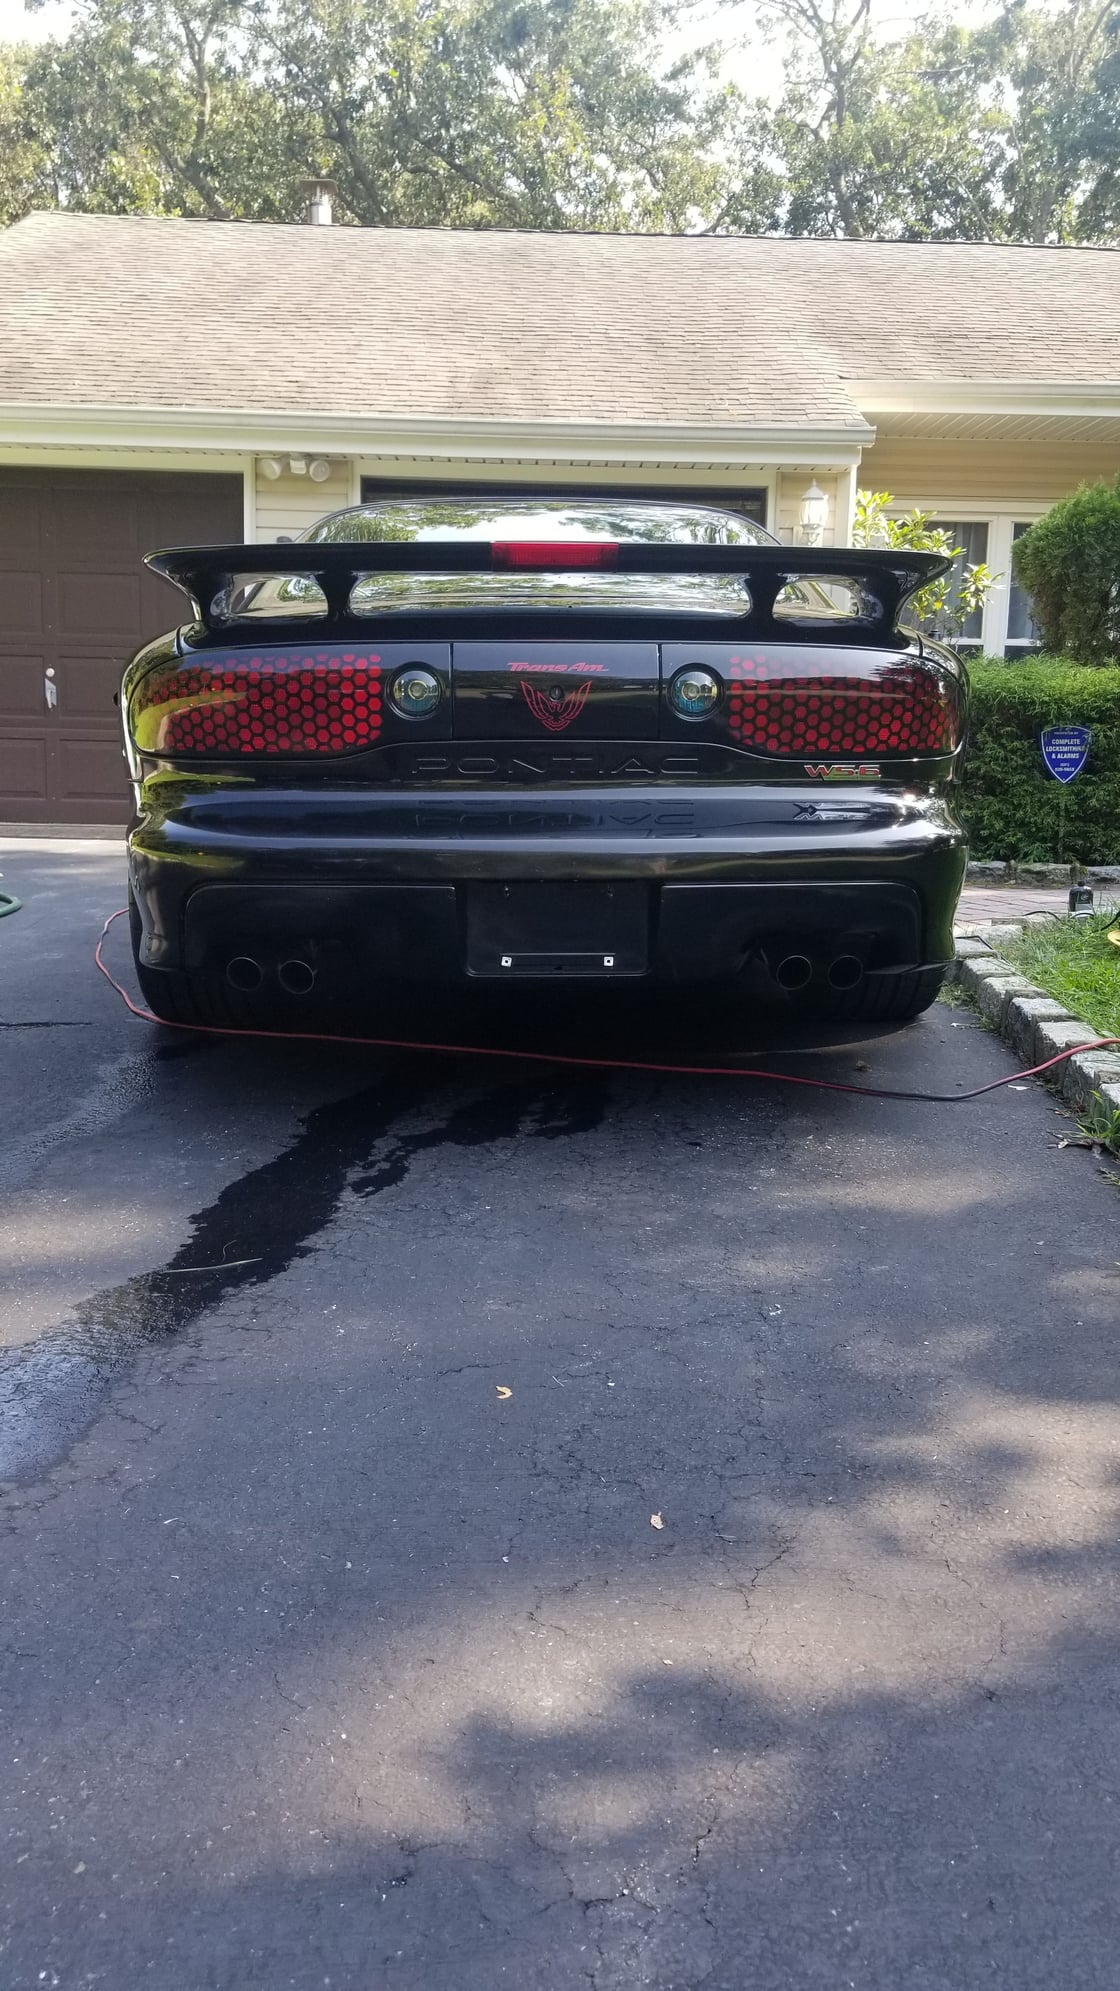 2002 Pontiac Firebird - 2002 Trans Am WS6 - Used - VIN Upon request - 143,000 Miles - 8 cyl - 2WD - Automatic - Coupe - Black - Coram, NY 11727, United States